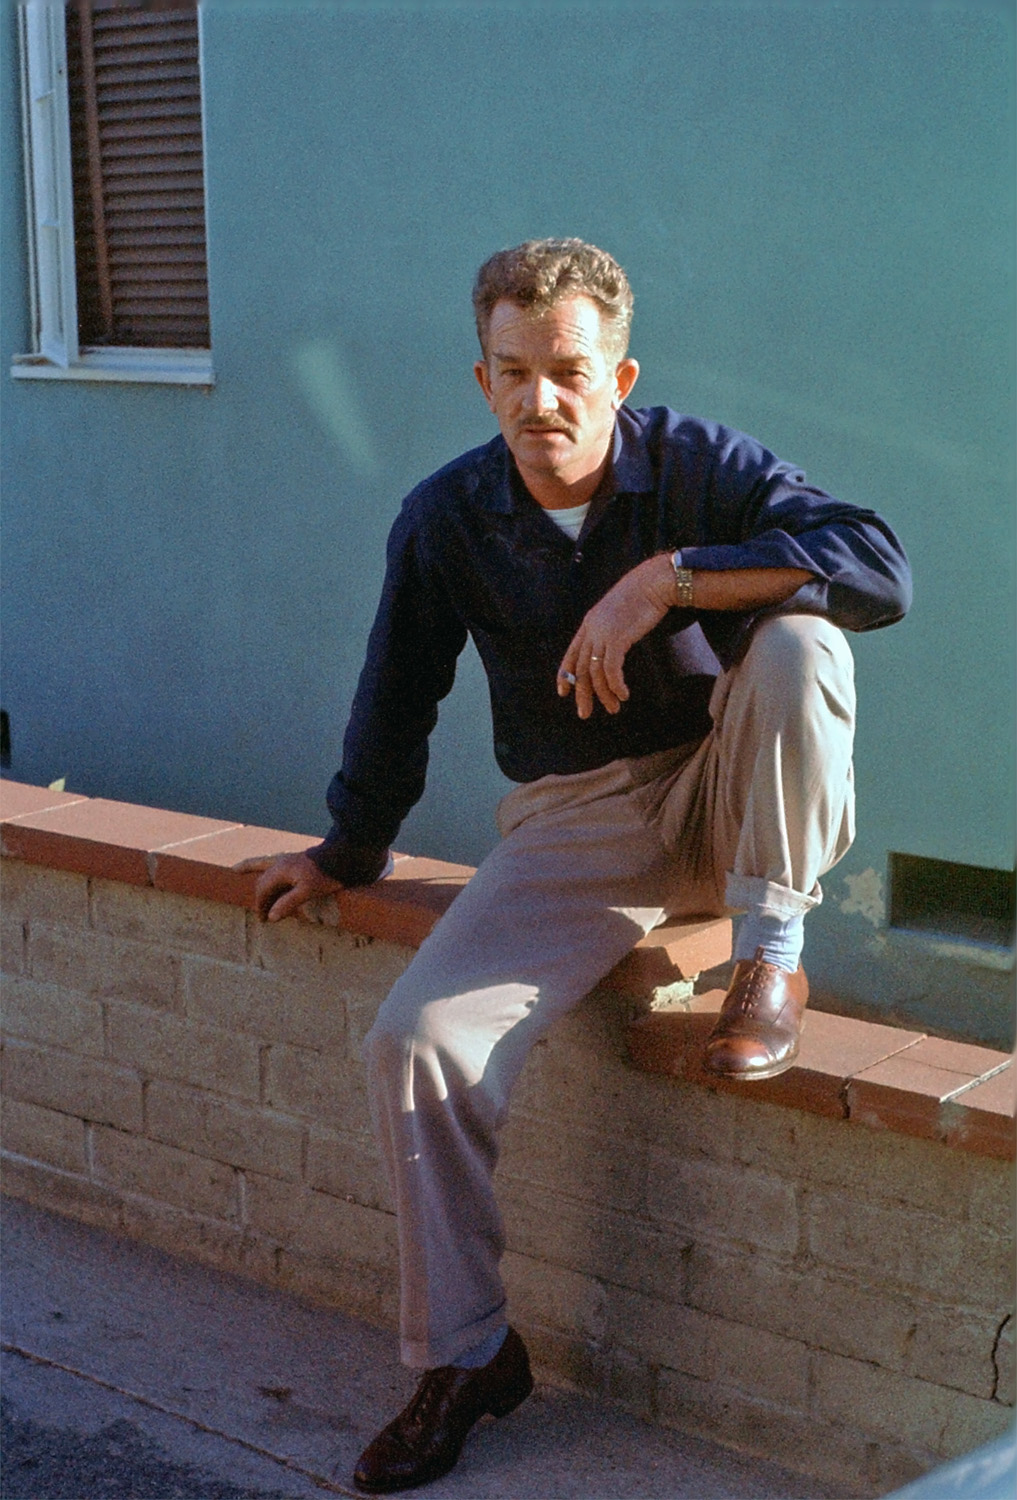 Late-1950s Kodachrome slide. My father-in-law Woodrow used to tell me he needed to be careful or he'd slice his finger on the knife pleat of his pants. Only his wit was sharper. He took this photo.
 View full size.